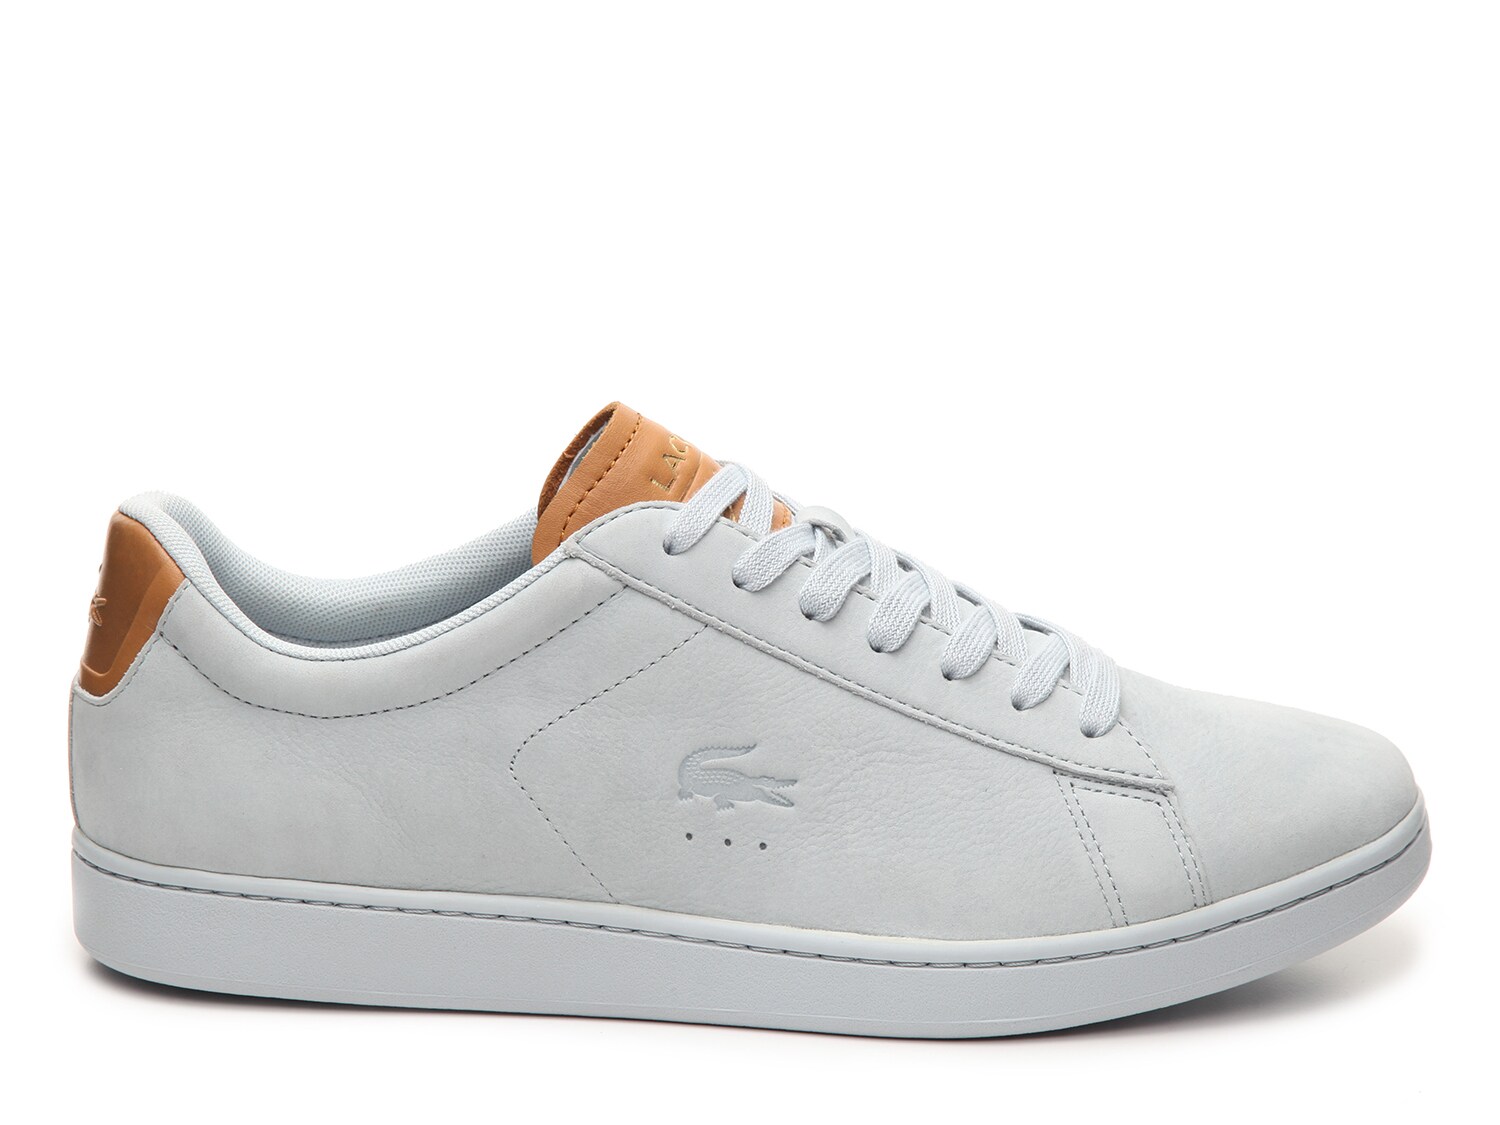 dsw lacoste Cheaper Than Retail Price 